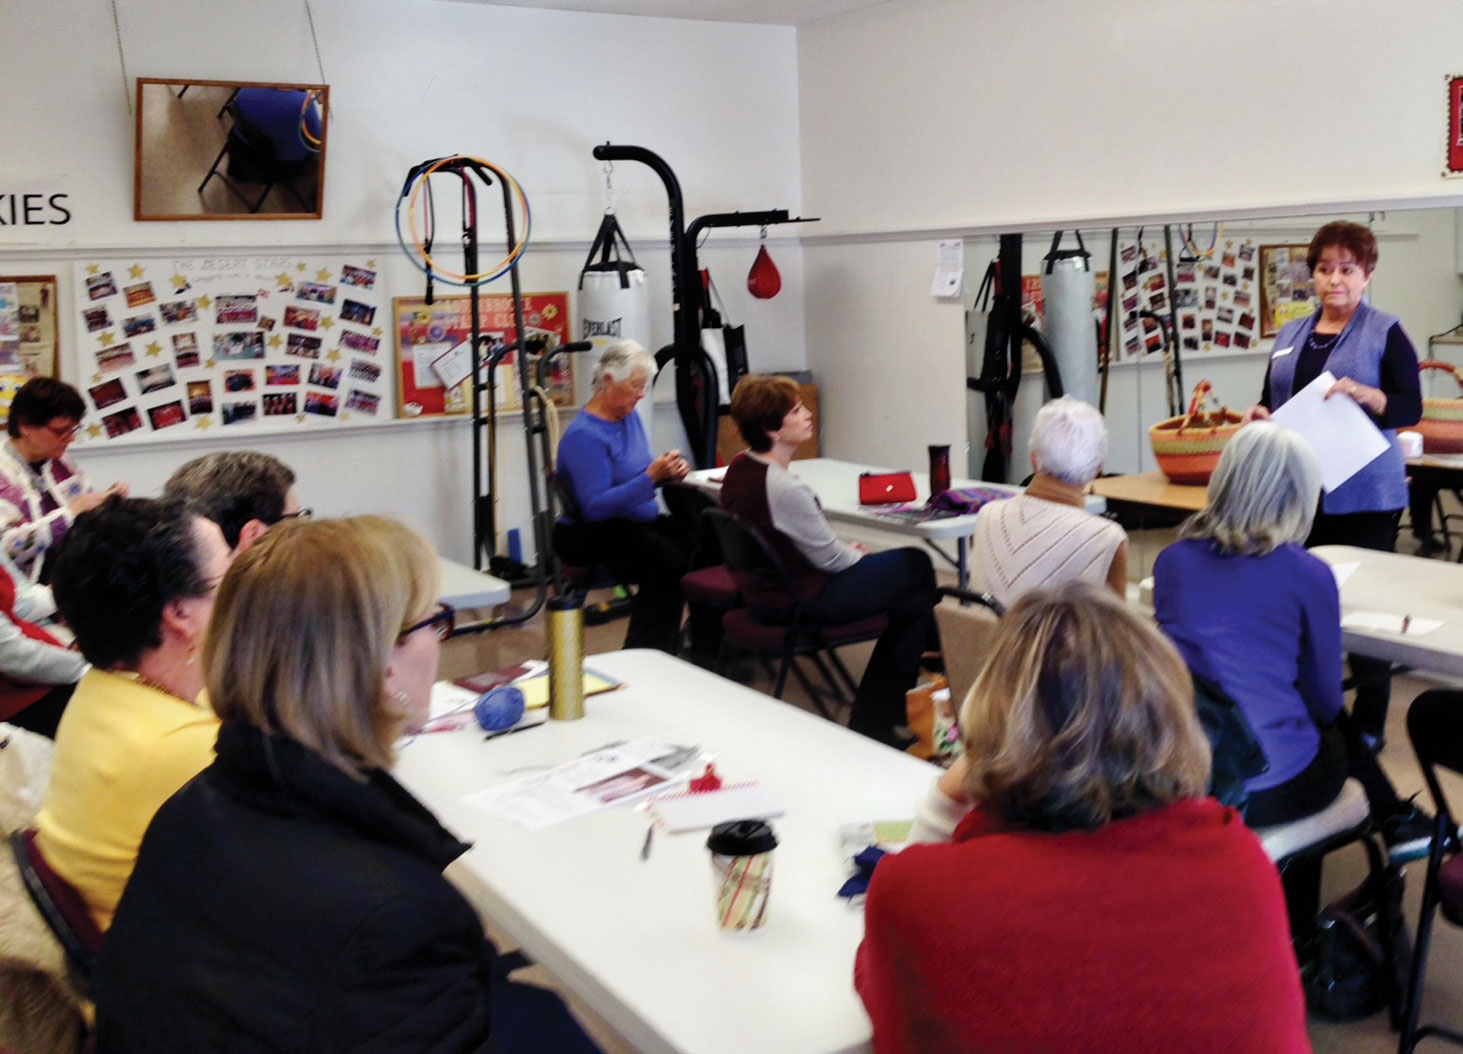 Linda Hood teaches a class as part of our Knit Along vest option offered this spring.